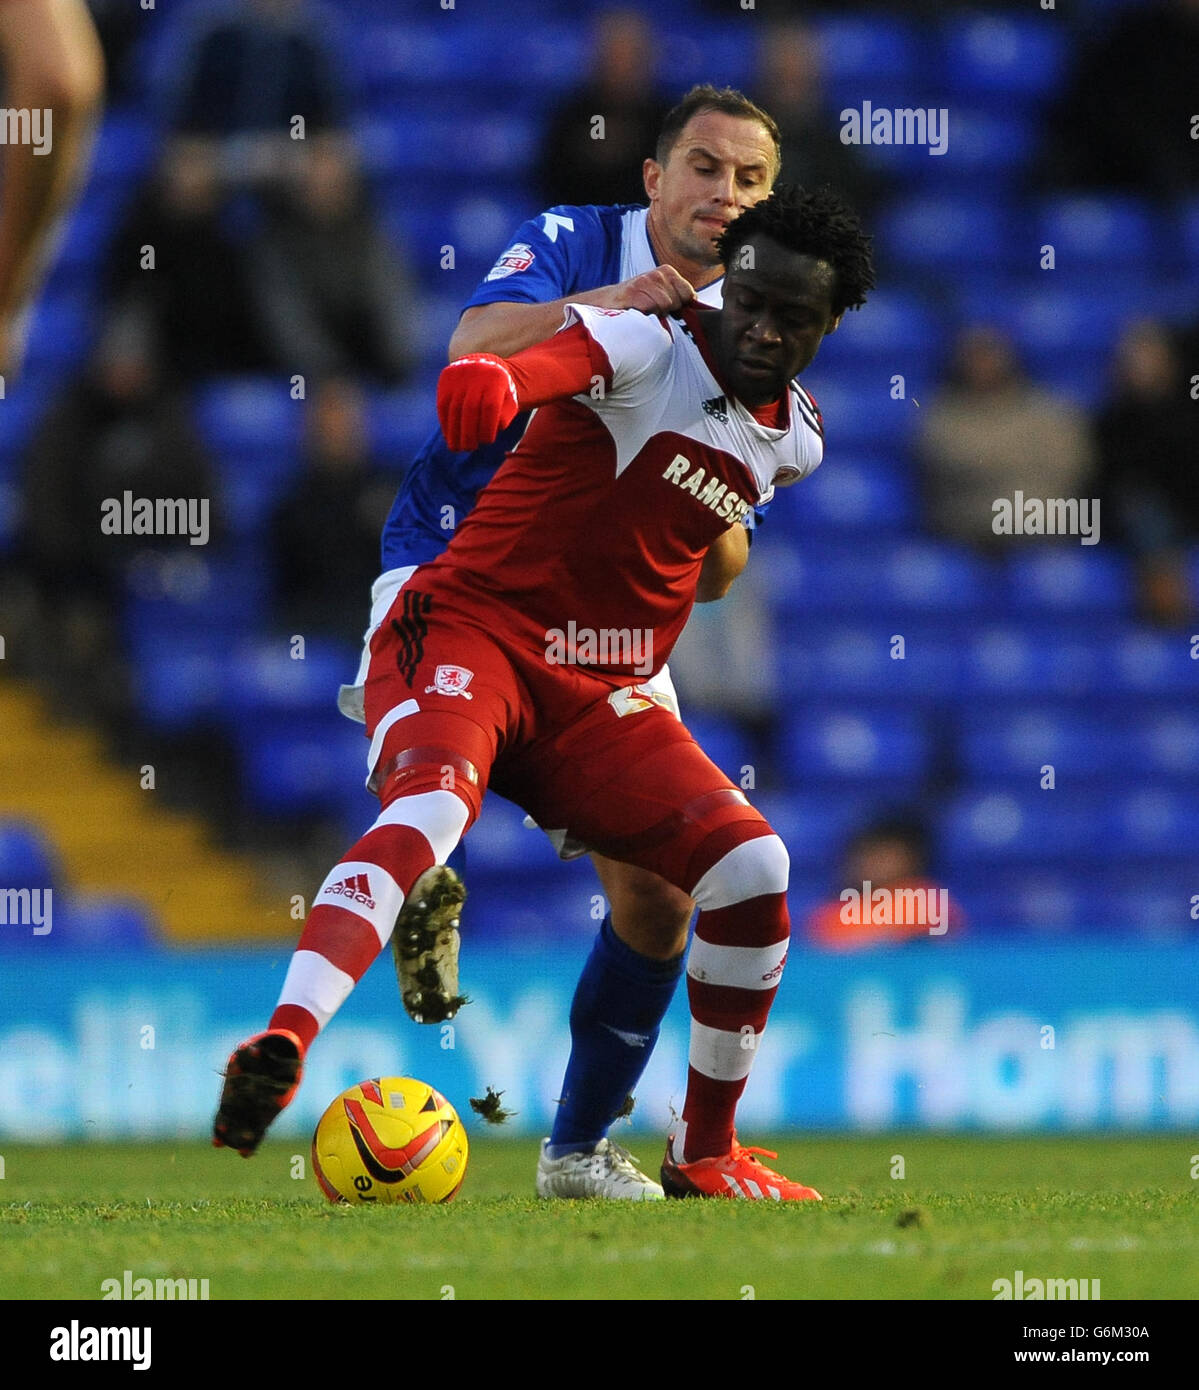 Soccer - Sky Bet Championship - Birmingham City v Middlesbrough - St Andrew's. Birmingham City's Dariusz Dudka (back) and Middlesbrough's Kei Kamara (front) battle for the ball. Stock Photo